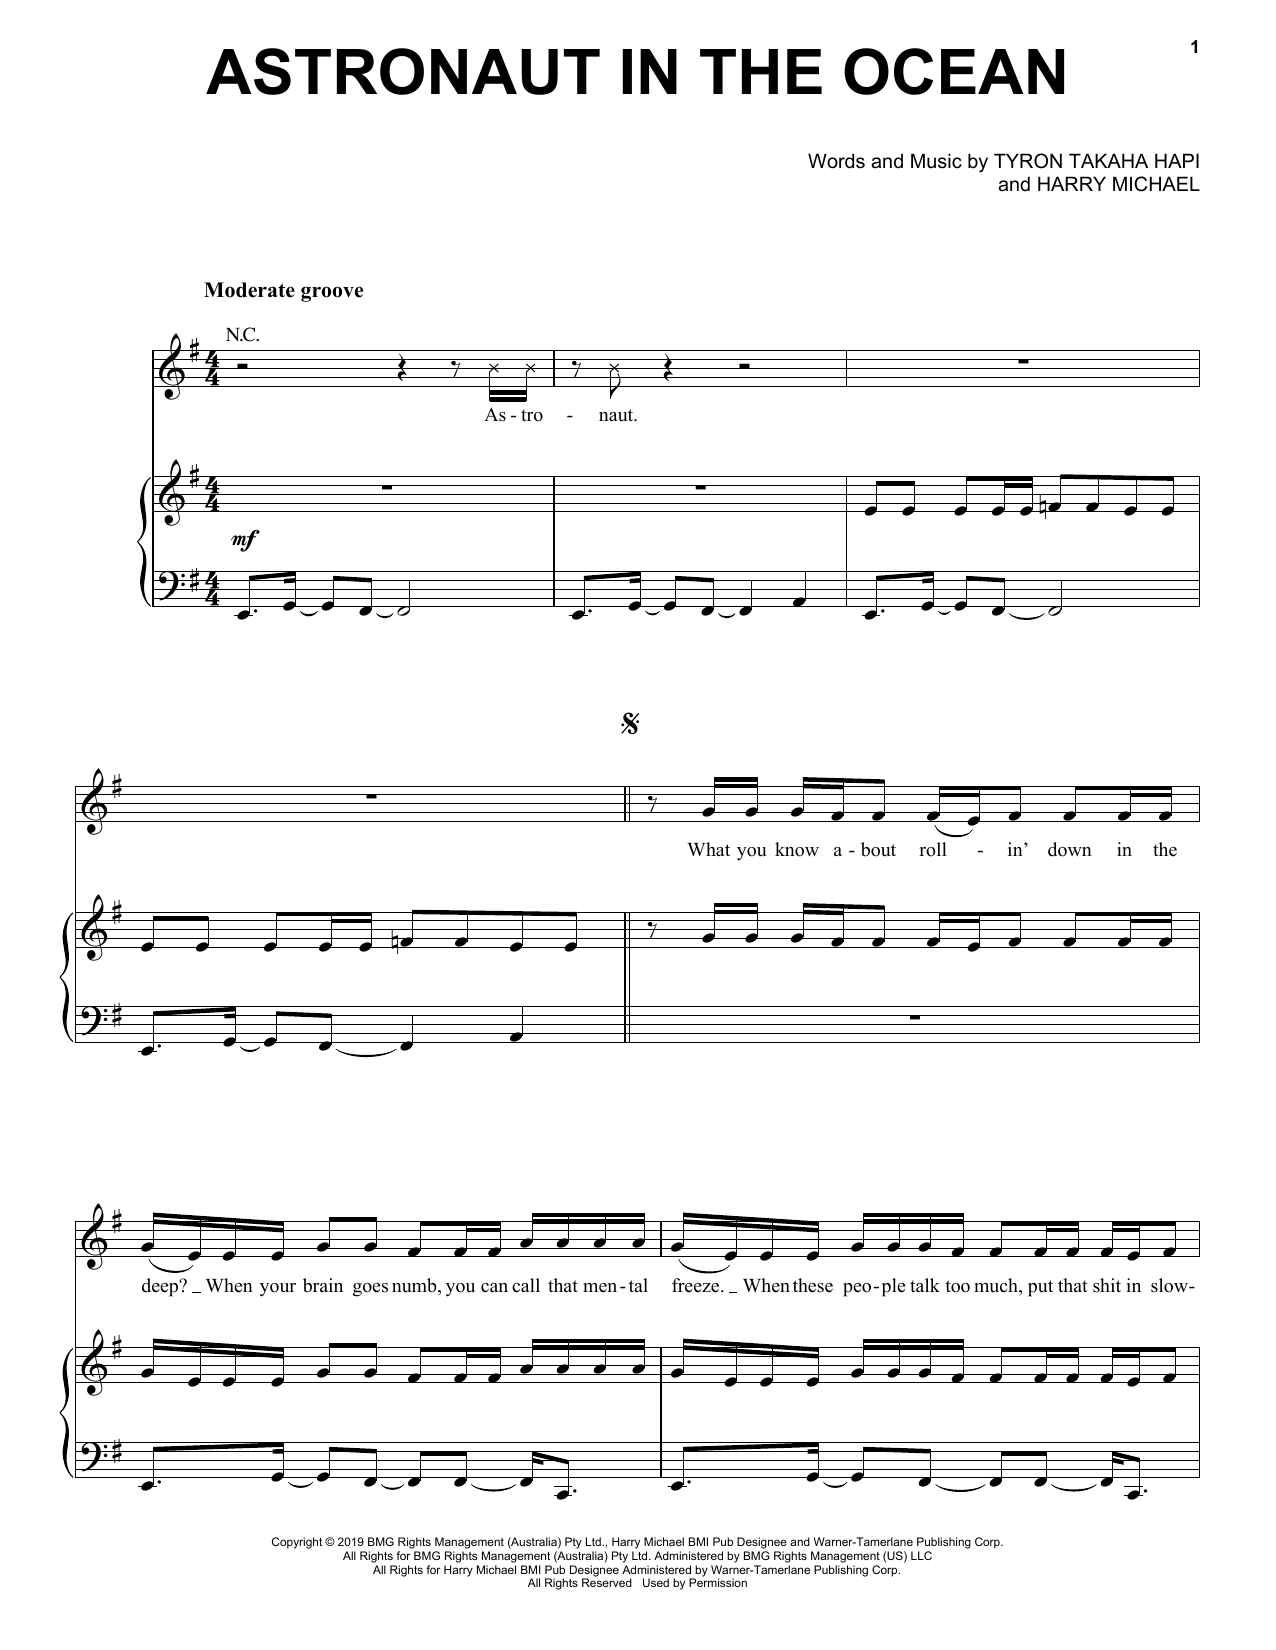 Masked Wolf Astronaut In The Ocean sheet music notes and chords. Download Printable PDF.